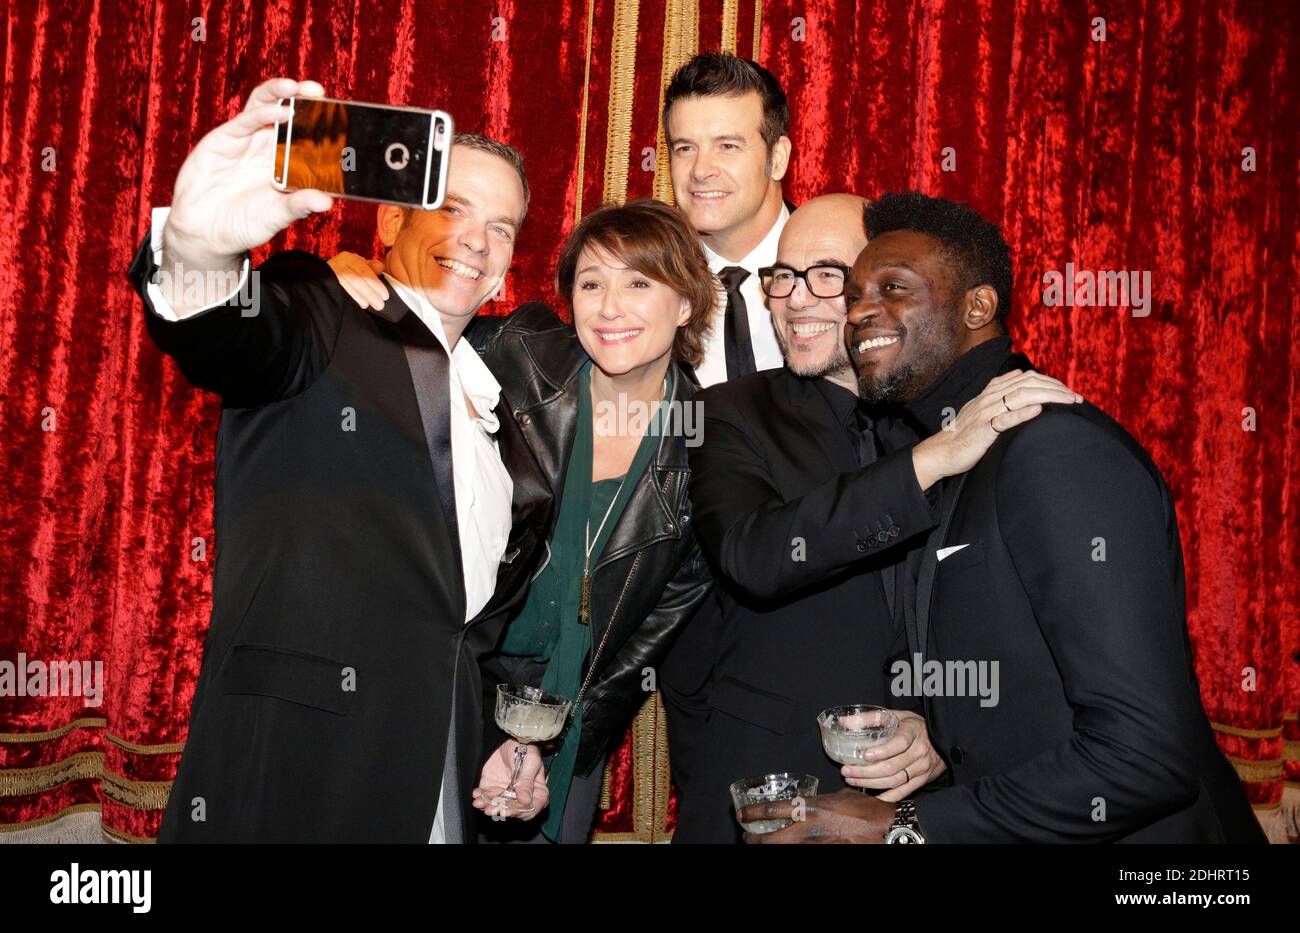 Garou, Daniela Lumbroso, Roch Voisine, Pascal Obispo and Corneille attending at the opening party of 'Manko' restaurant in Paris, France on February 05, 2016. Photo by Jerome Domine/ABACAPRESS.COM Stock Photo